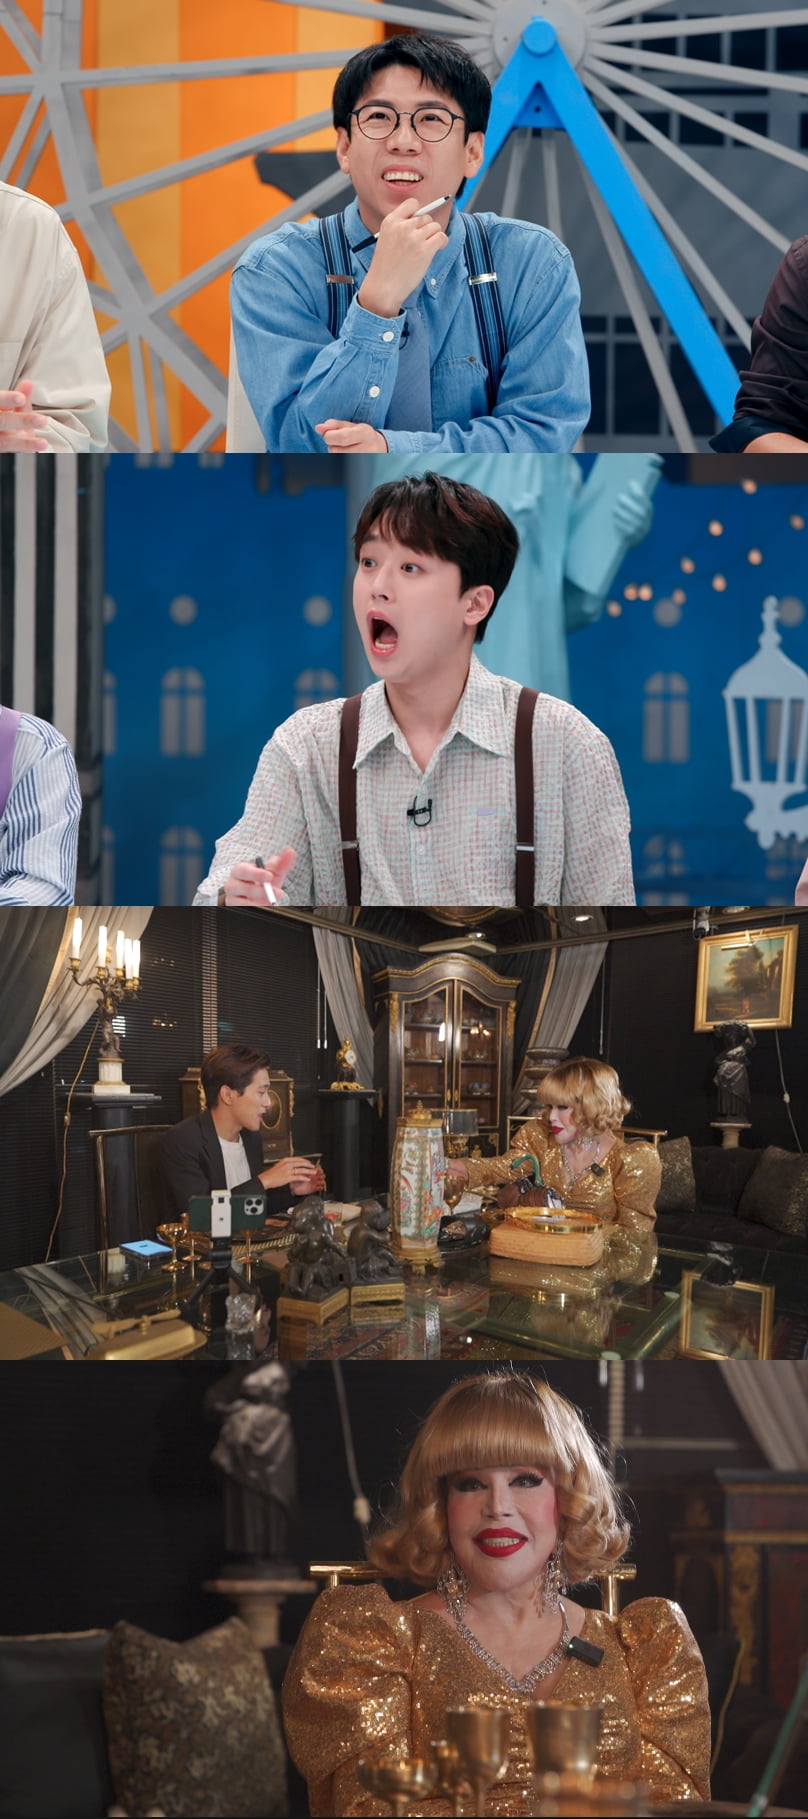 Lee Chan-won, the story of being shocked after seeing a Thai chaebol house